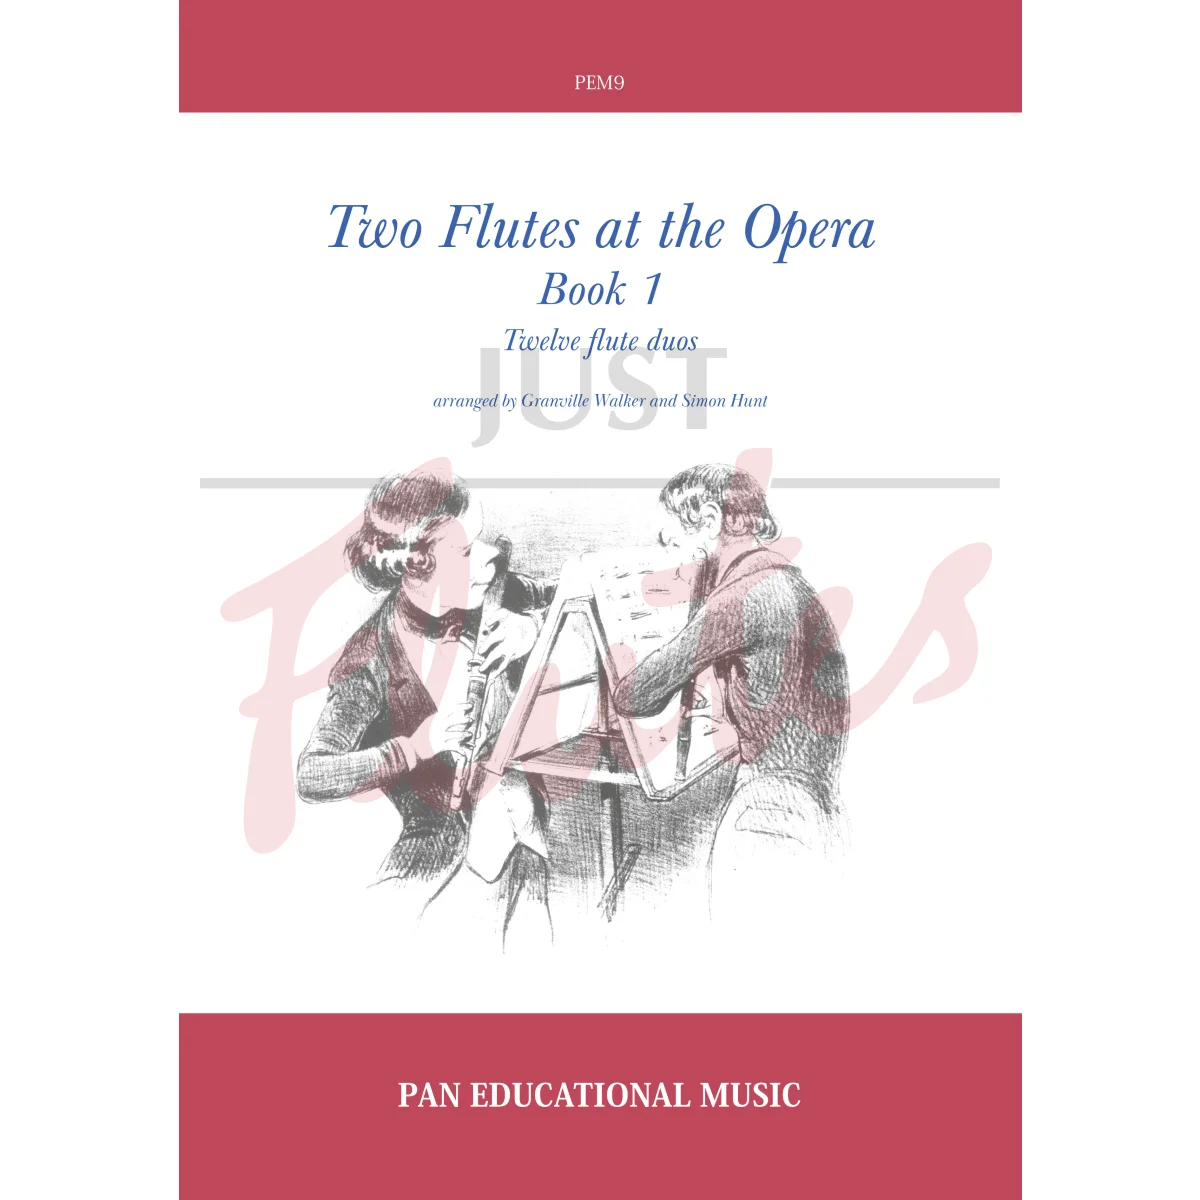 Two Flutes at the Opera Book 1